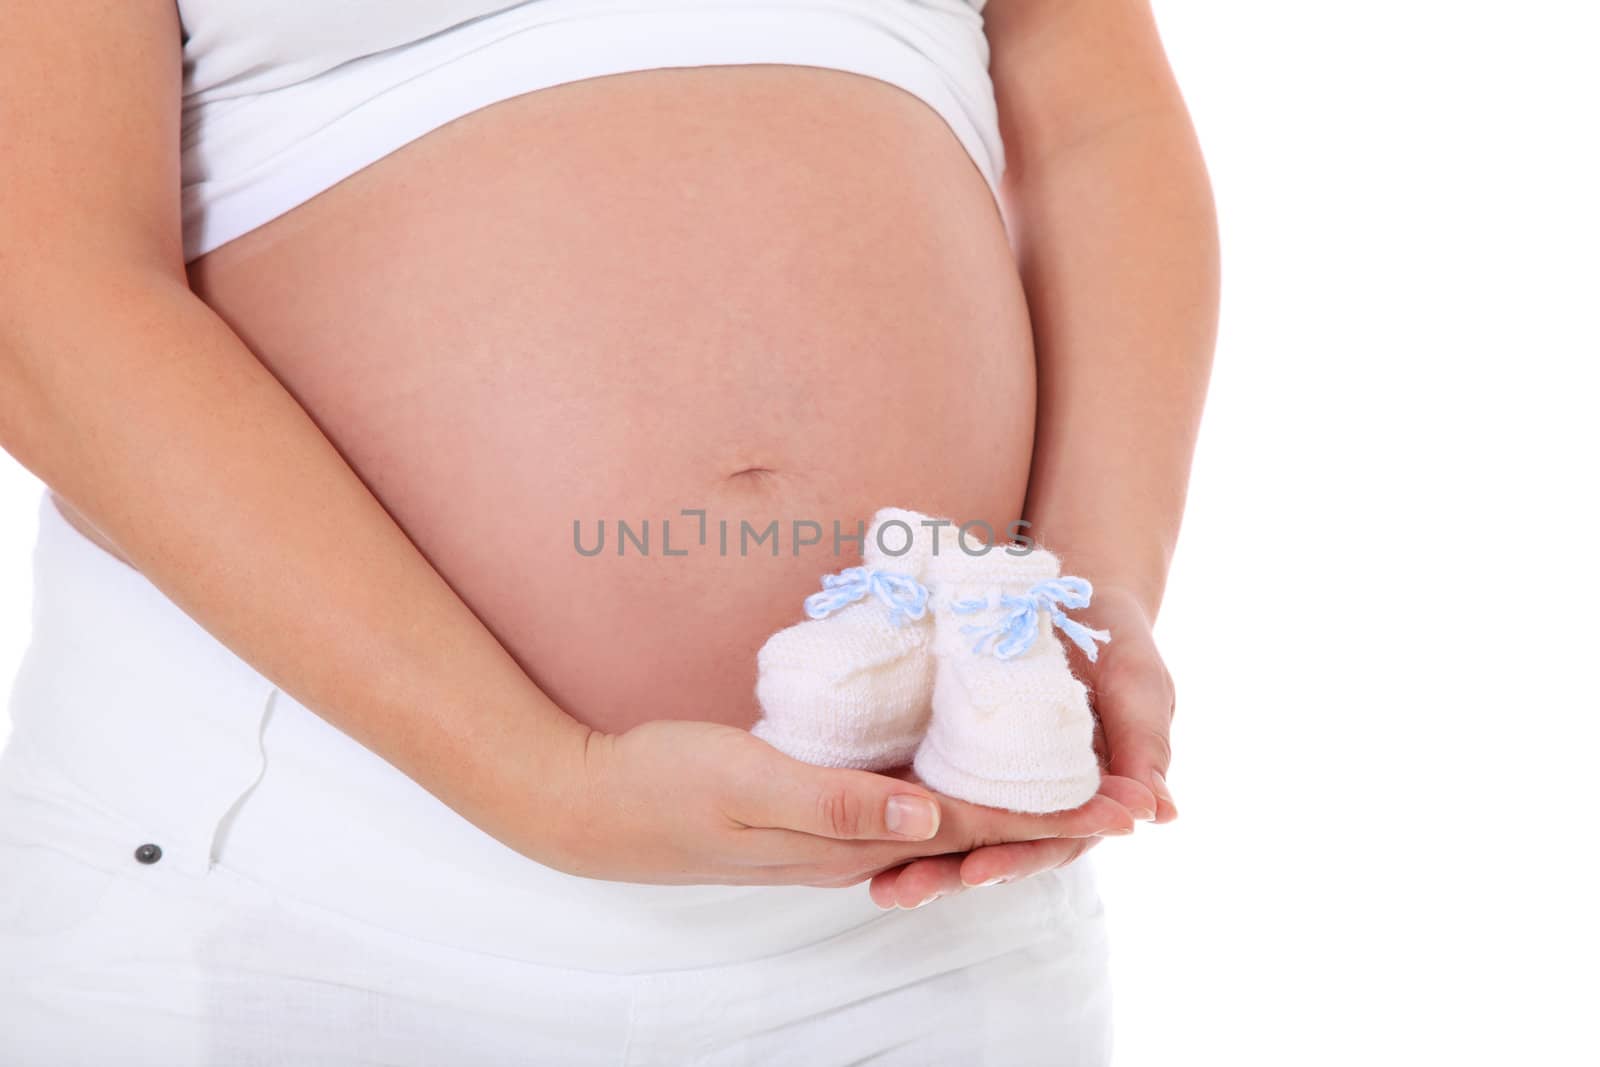 Pregnant woman holding baby shoes. All on white background.